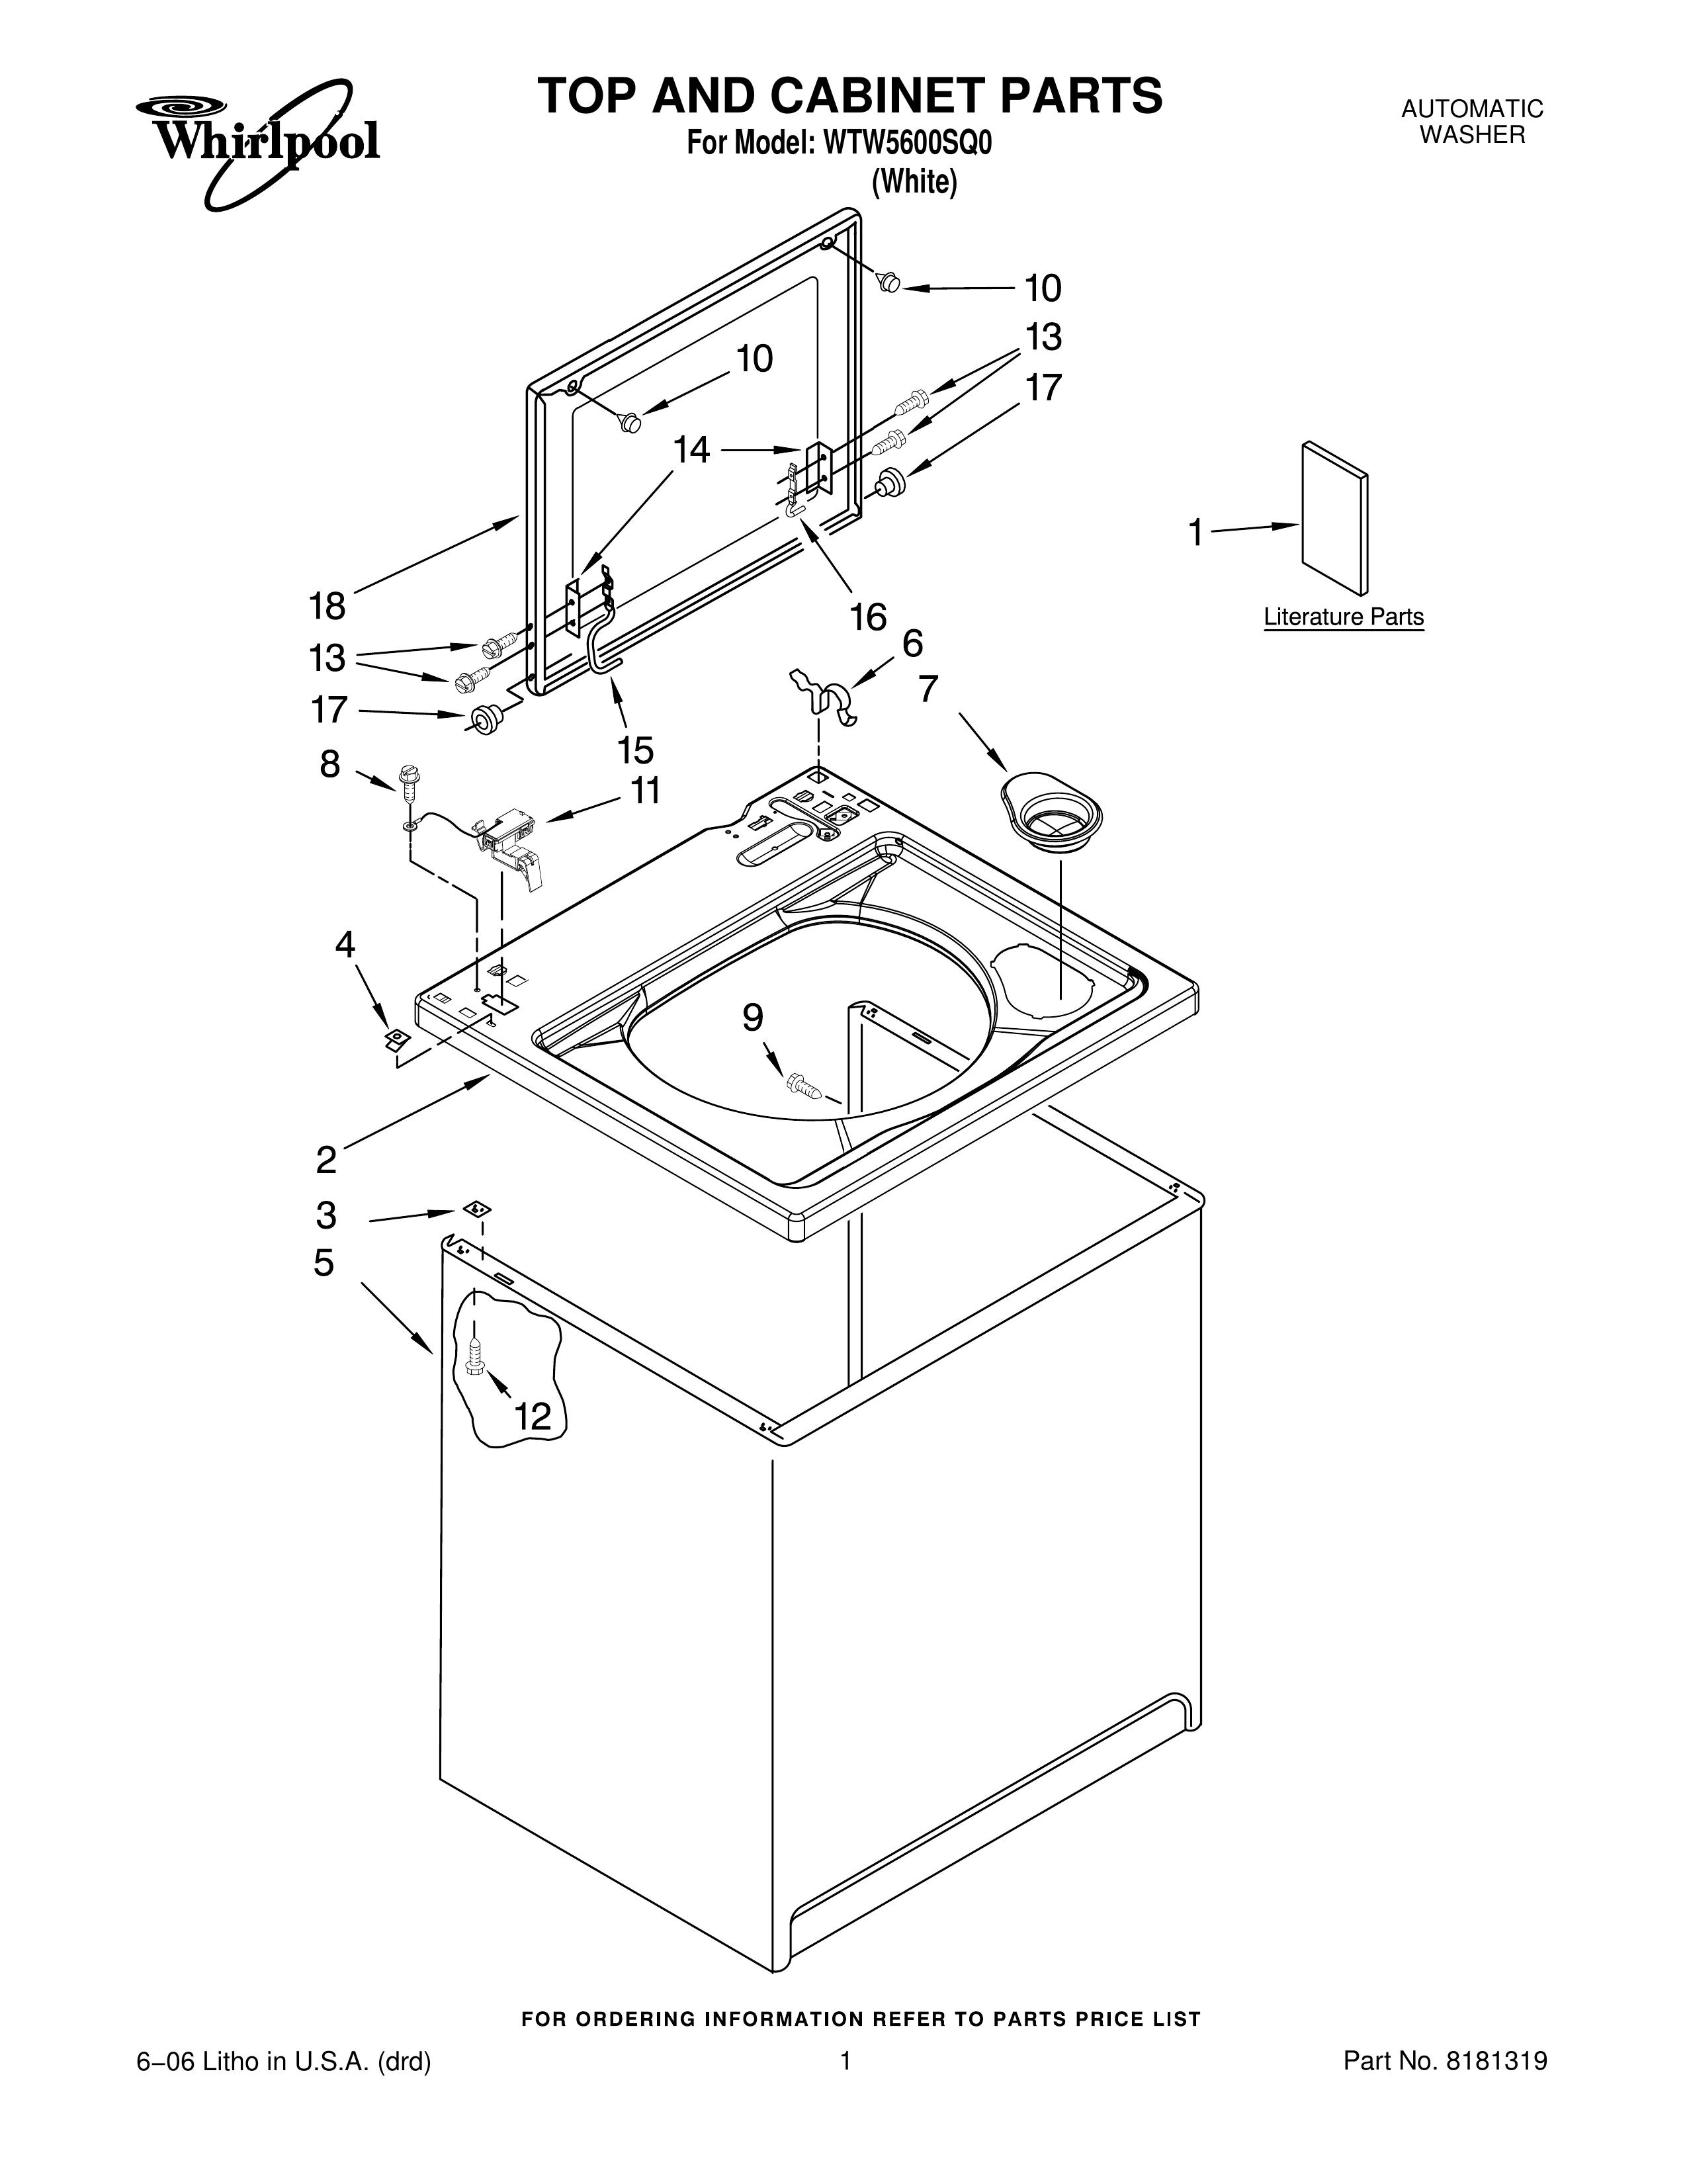 Whirlpool WTW5600SQ0 Dryer Accessories User Manual (Page 1)